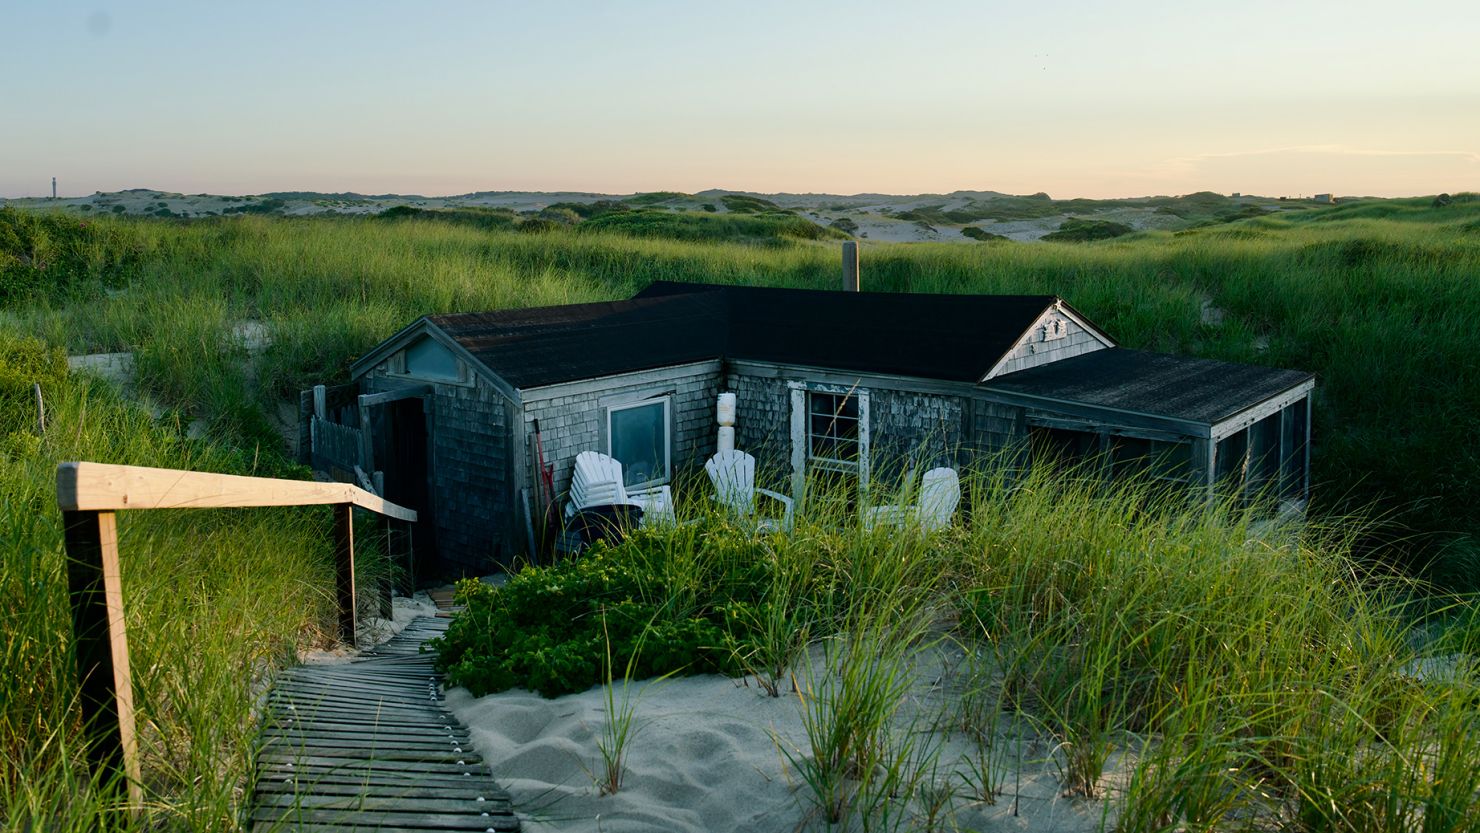 The Del Deo family has received a five-year special use permit from the National Park Service for this rustic dune shack.